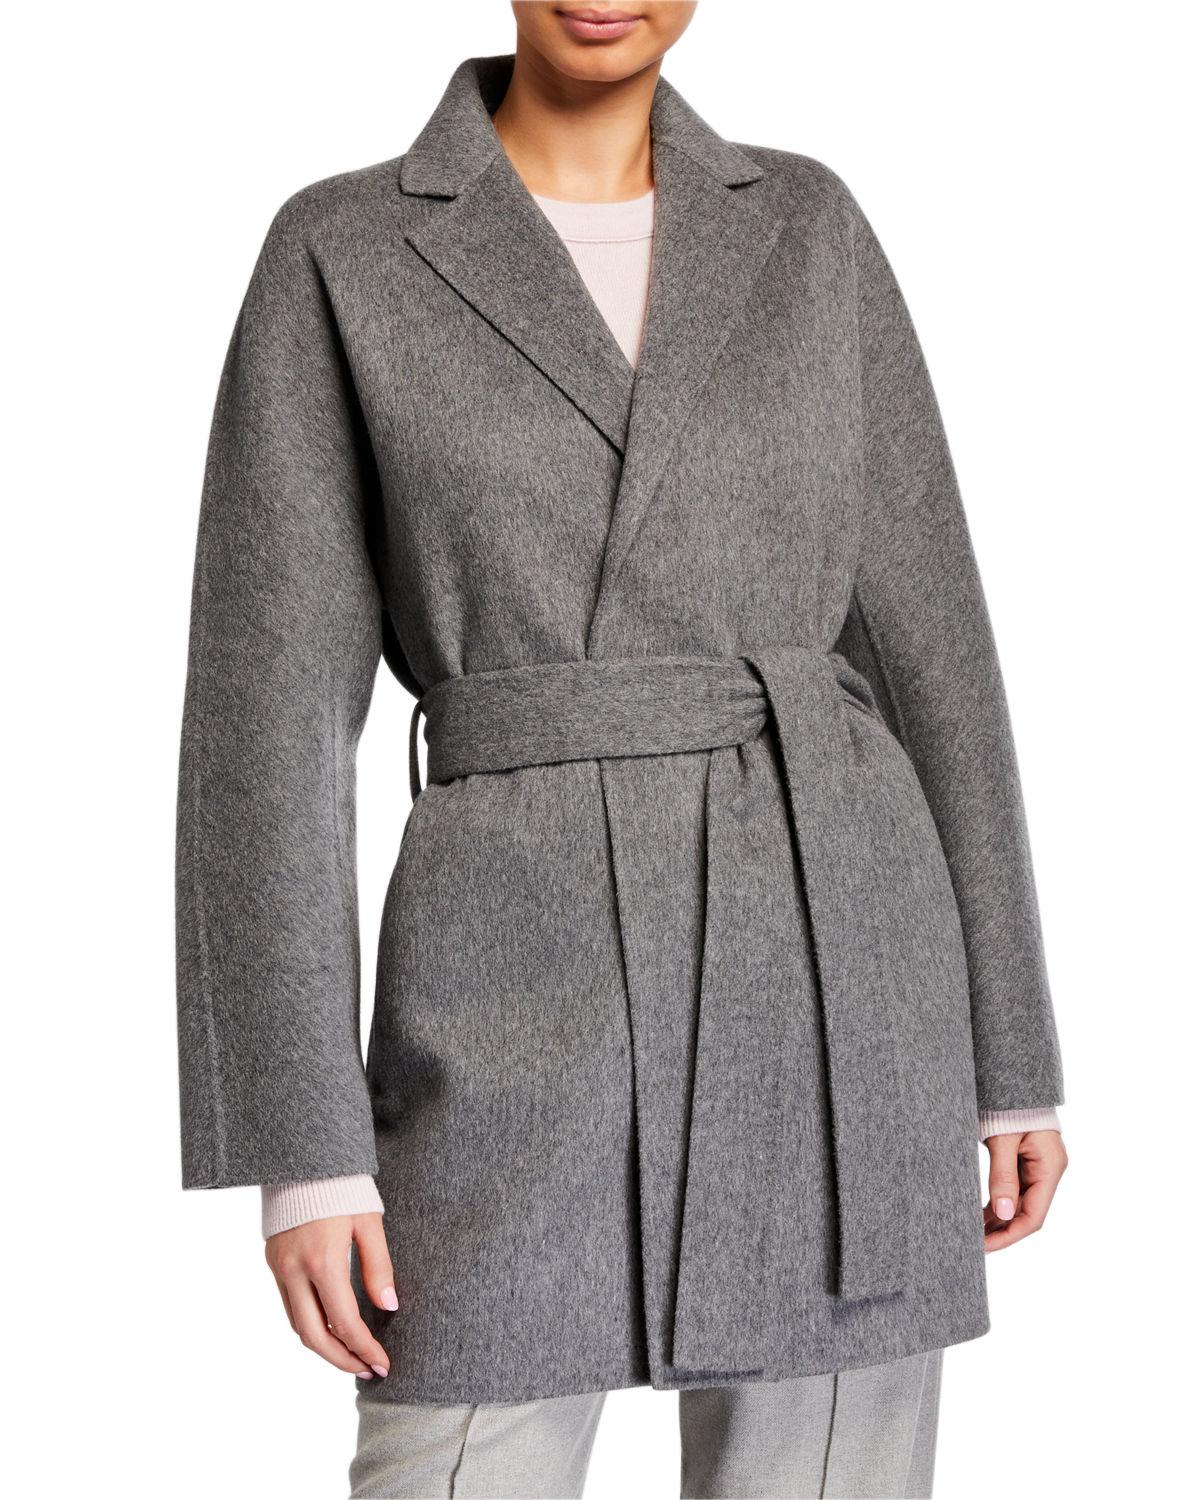 Vince Wool Belted Cardigan Coat in Gray - Lyst